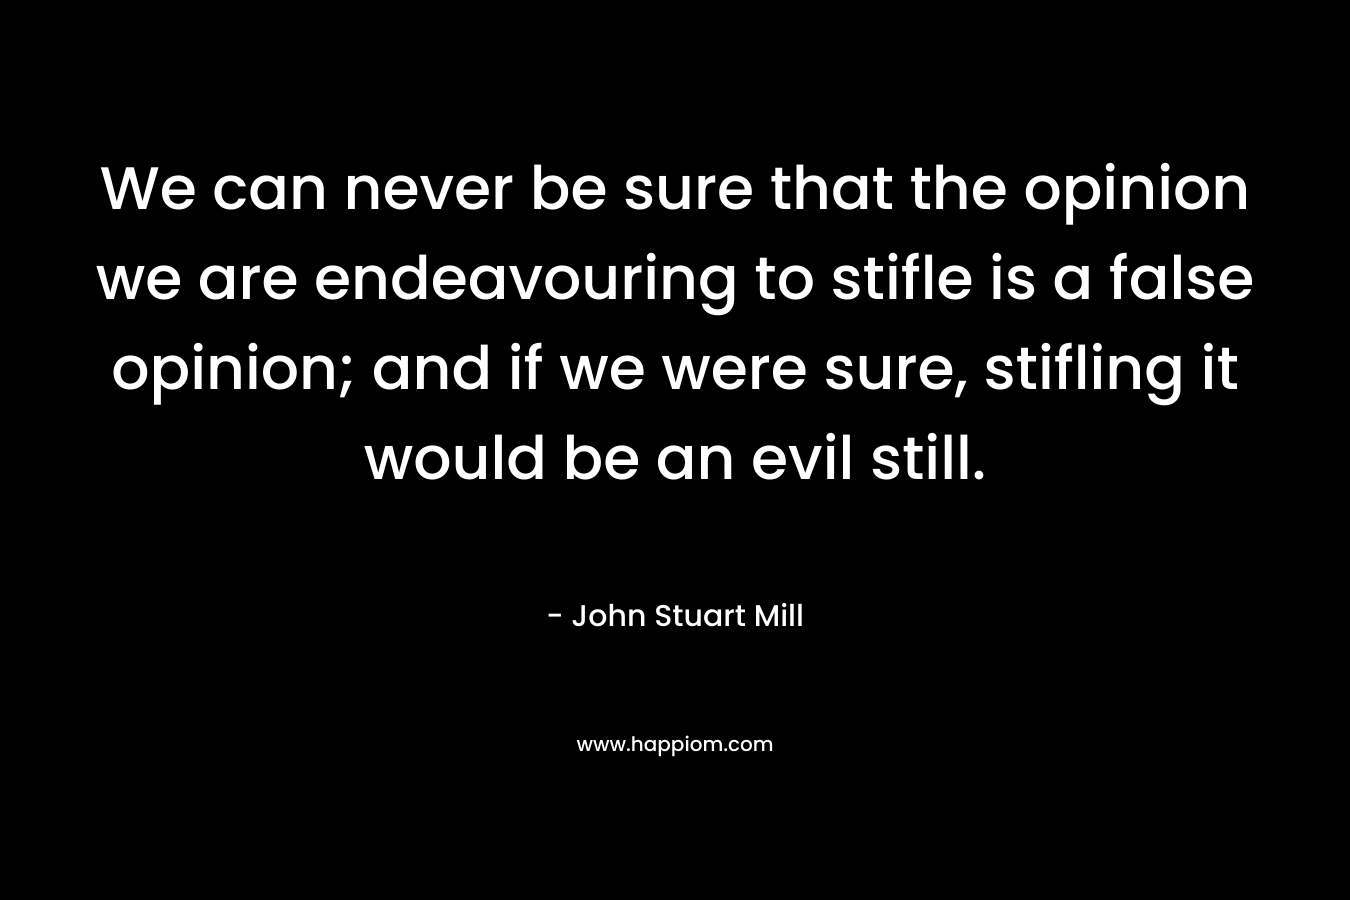 We can never be sure that the opinion we are endeavouring to stifle is a false opinion; and if we were sure, stifling it would be an evil still. – John Stuart Mill